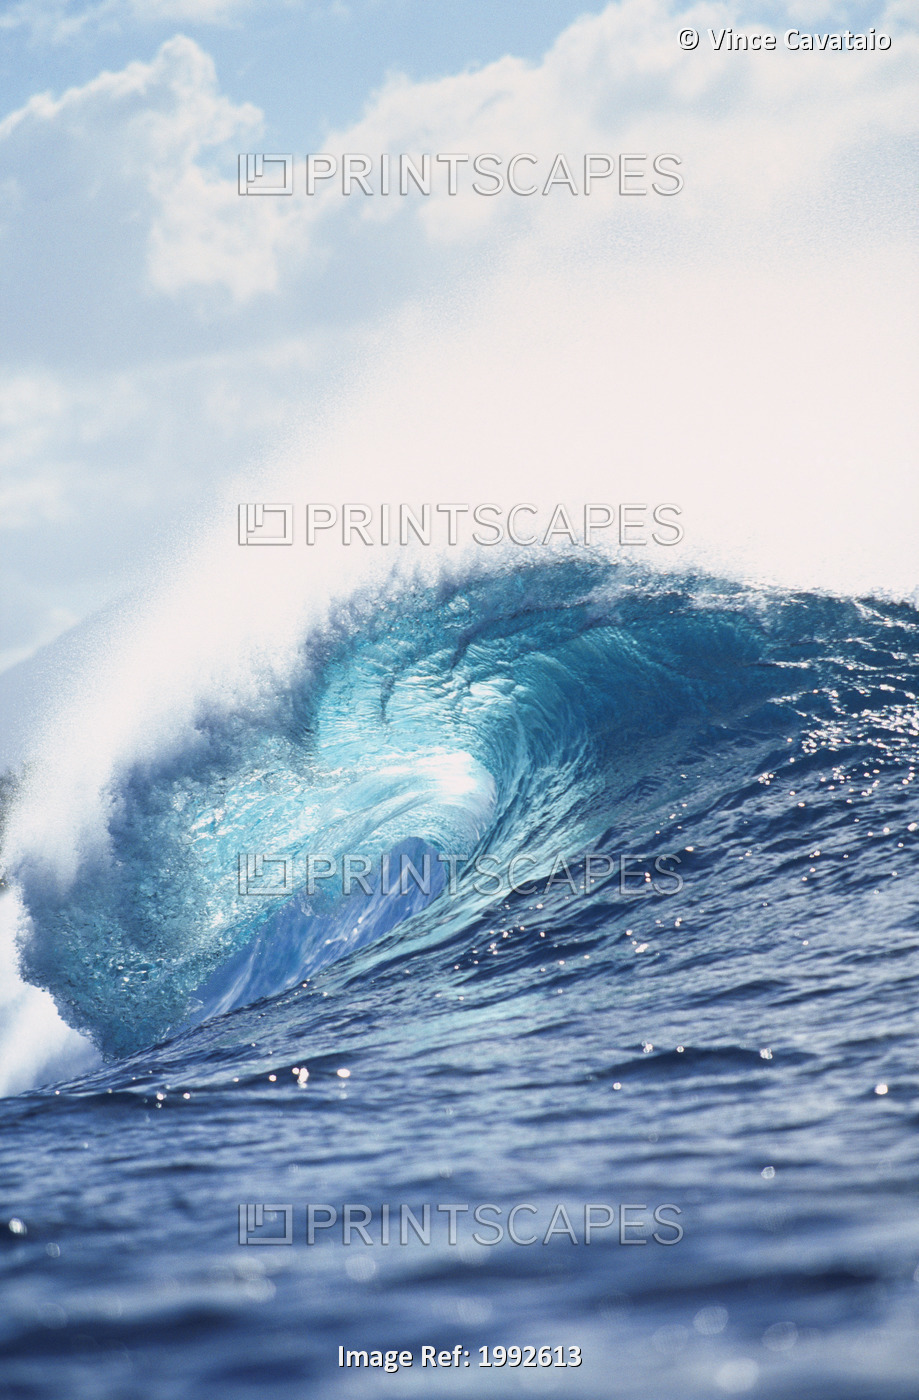 Hawaii, Oahu, North Shore, Pipeline, View Looking Through Curl Of Wave.